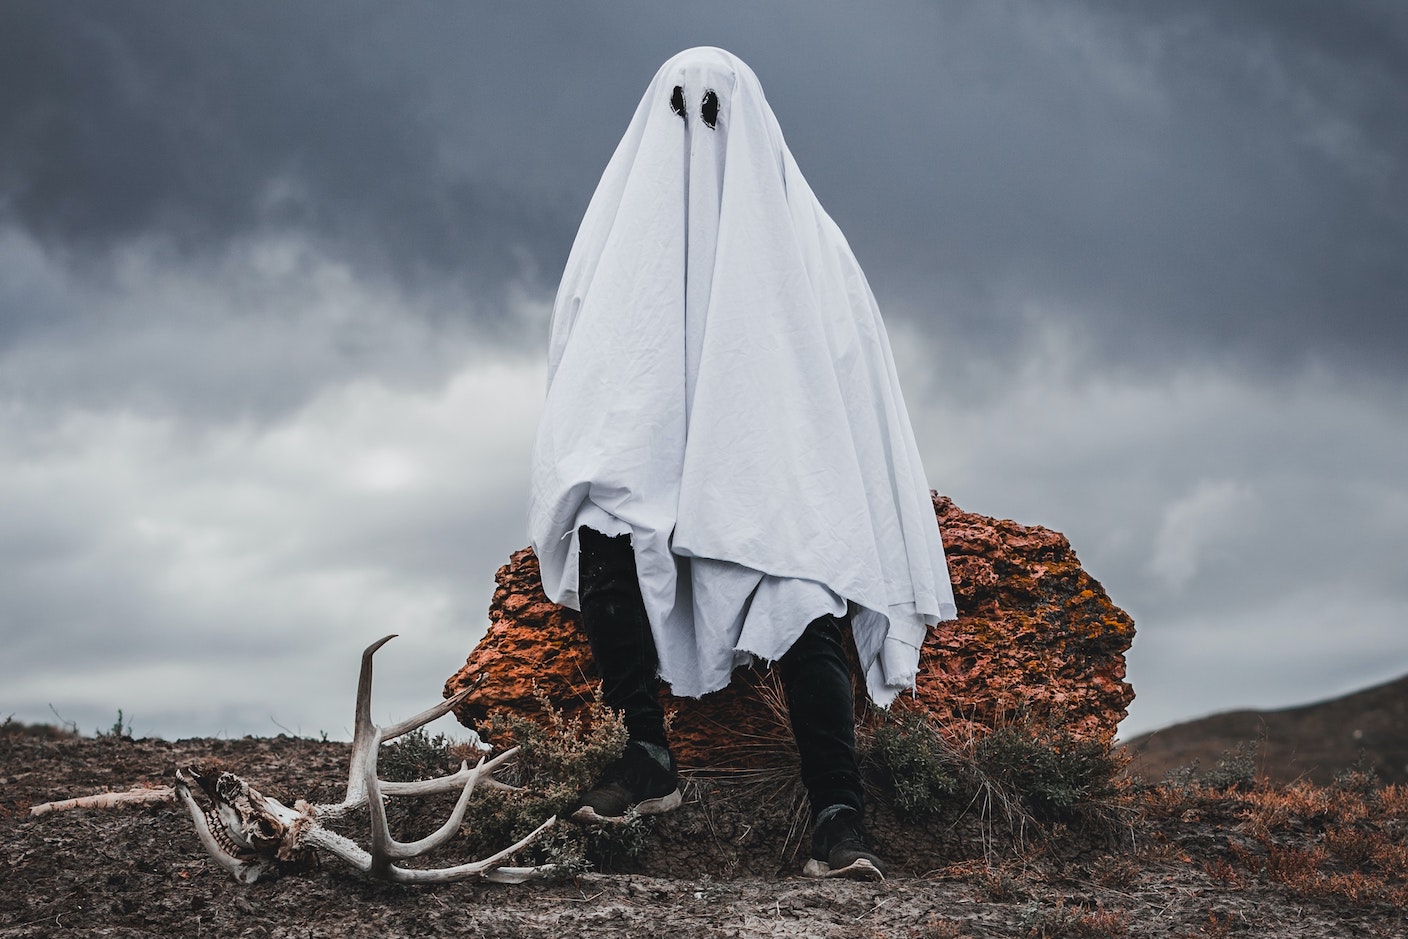 Image of a man wearing a sheet dressed to look like a ghost